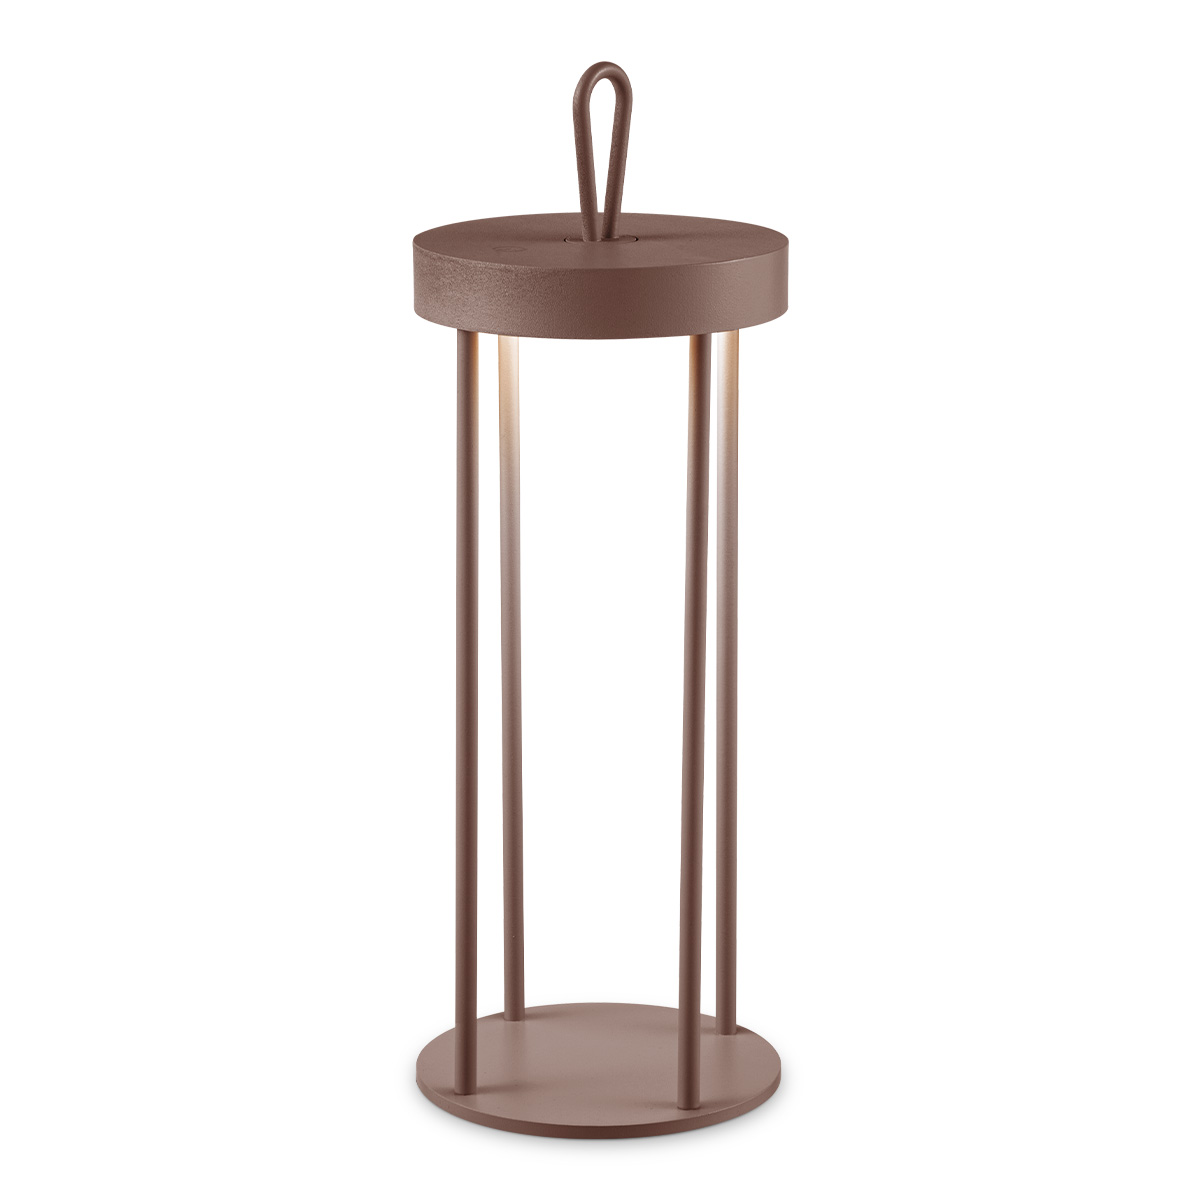 Tangla lighting - TLT7654-01BW - LED table lamp - outdoor lighting - rechargeable plastic and metal - touch dimmer - brown - pavilion